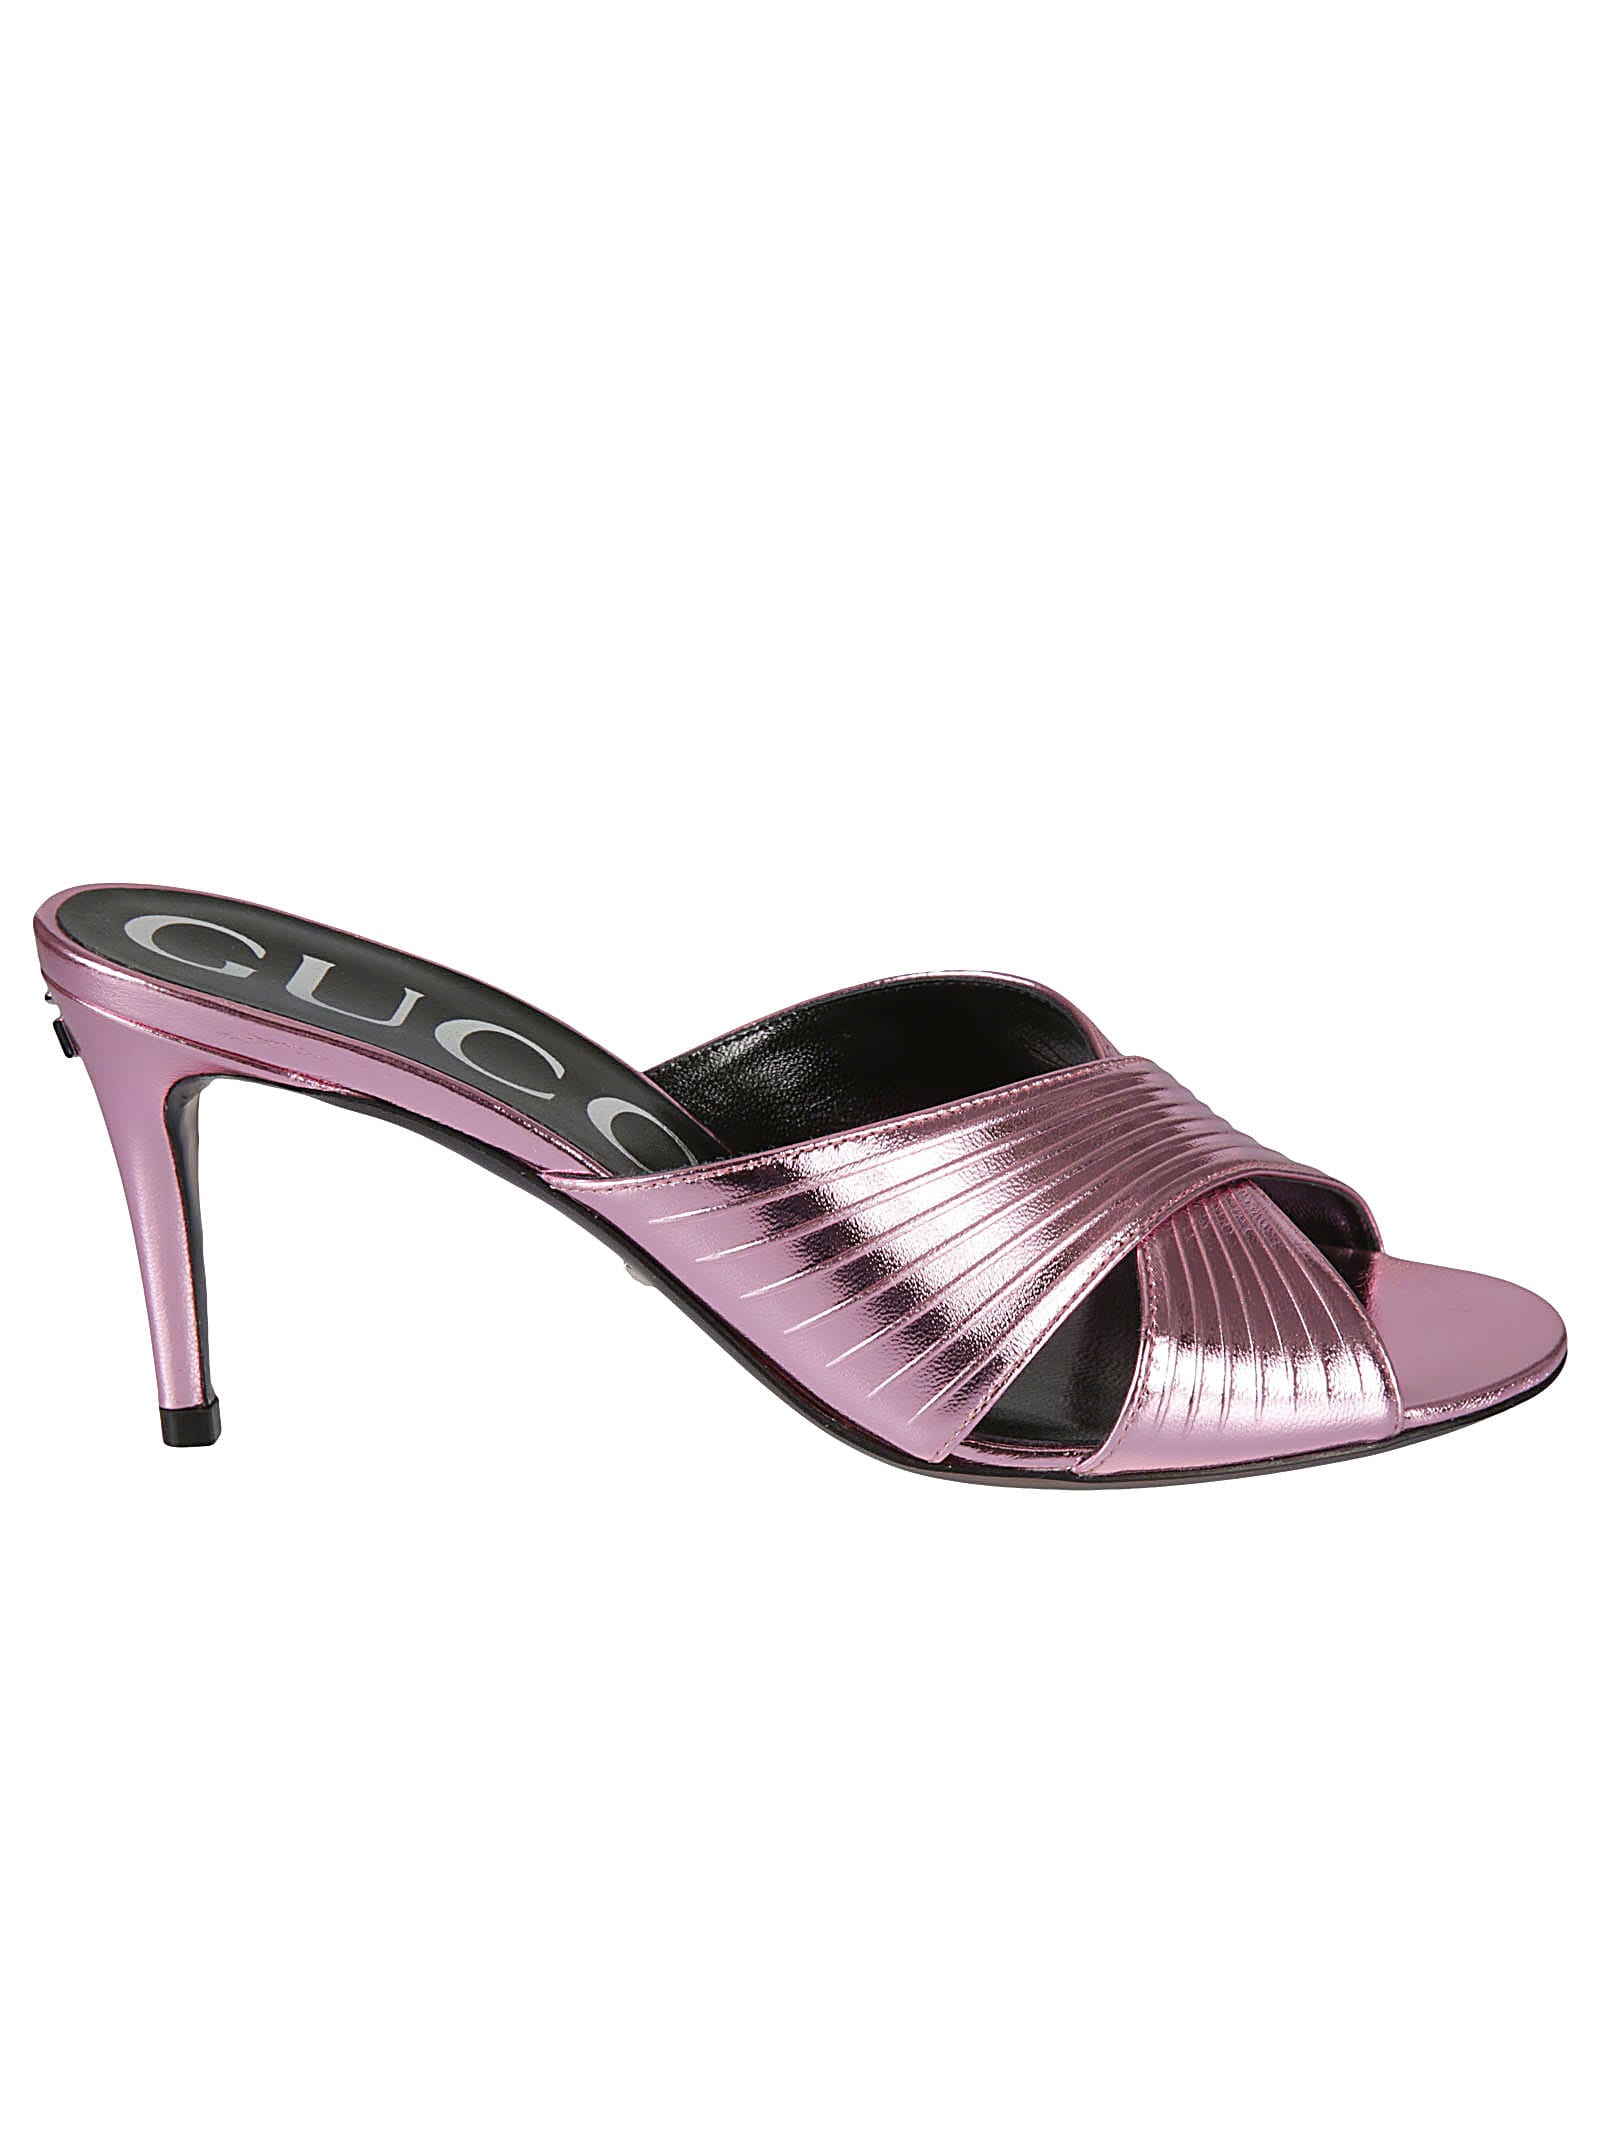 Buy Gucci Metallic Finish Sandals online, shop Gucci shoes with free shipping